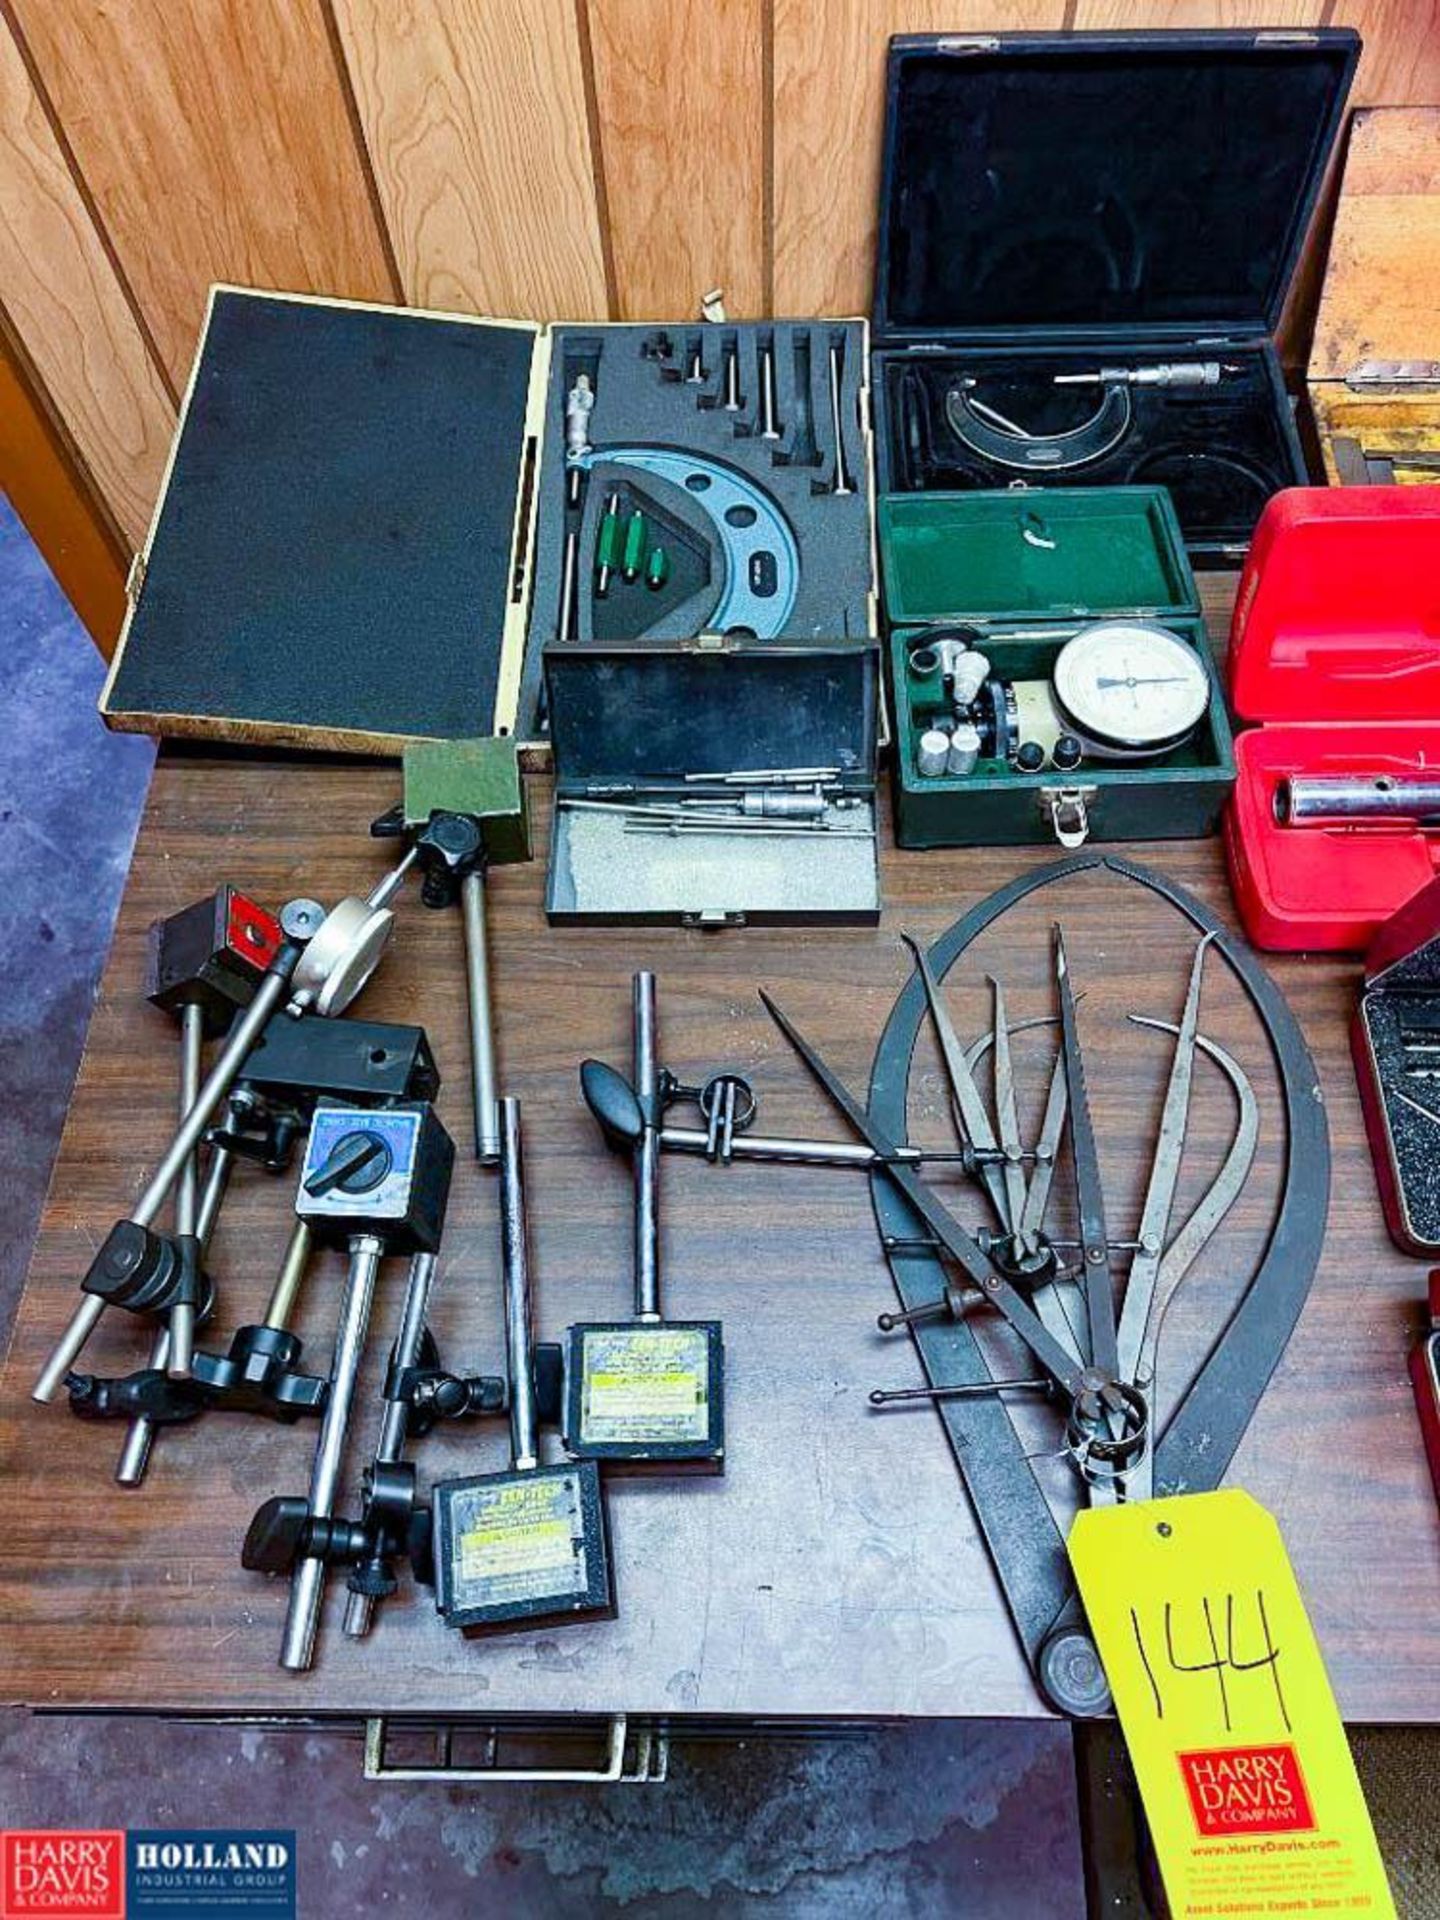 Assorted Micrometer Sets, Callipers, Gauges, Clamps, 4-Drawer Filing Cabinet, Desk and Chair with Ca